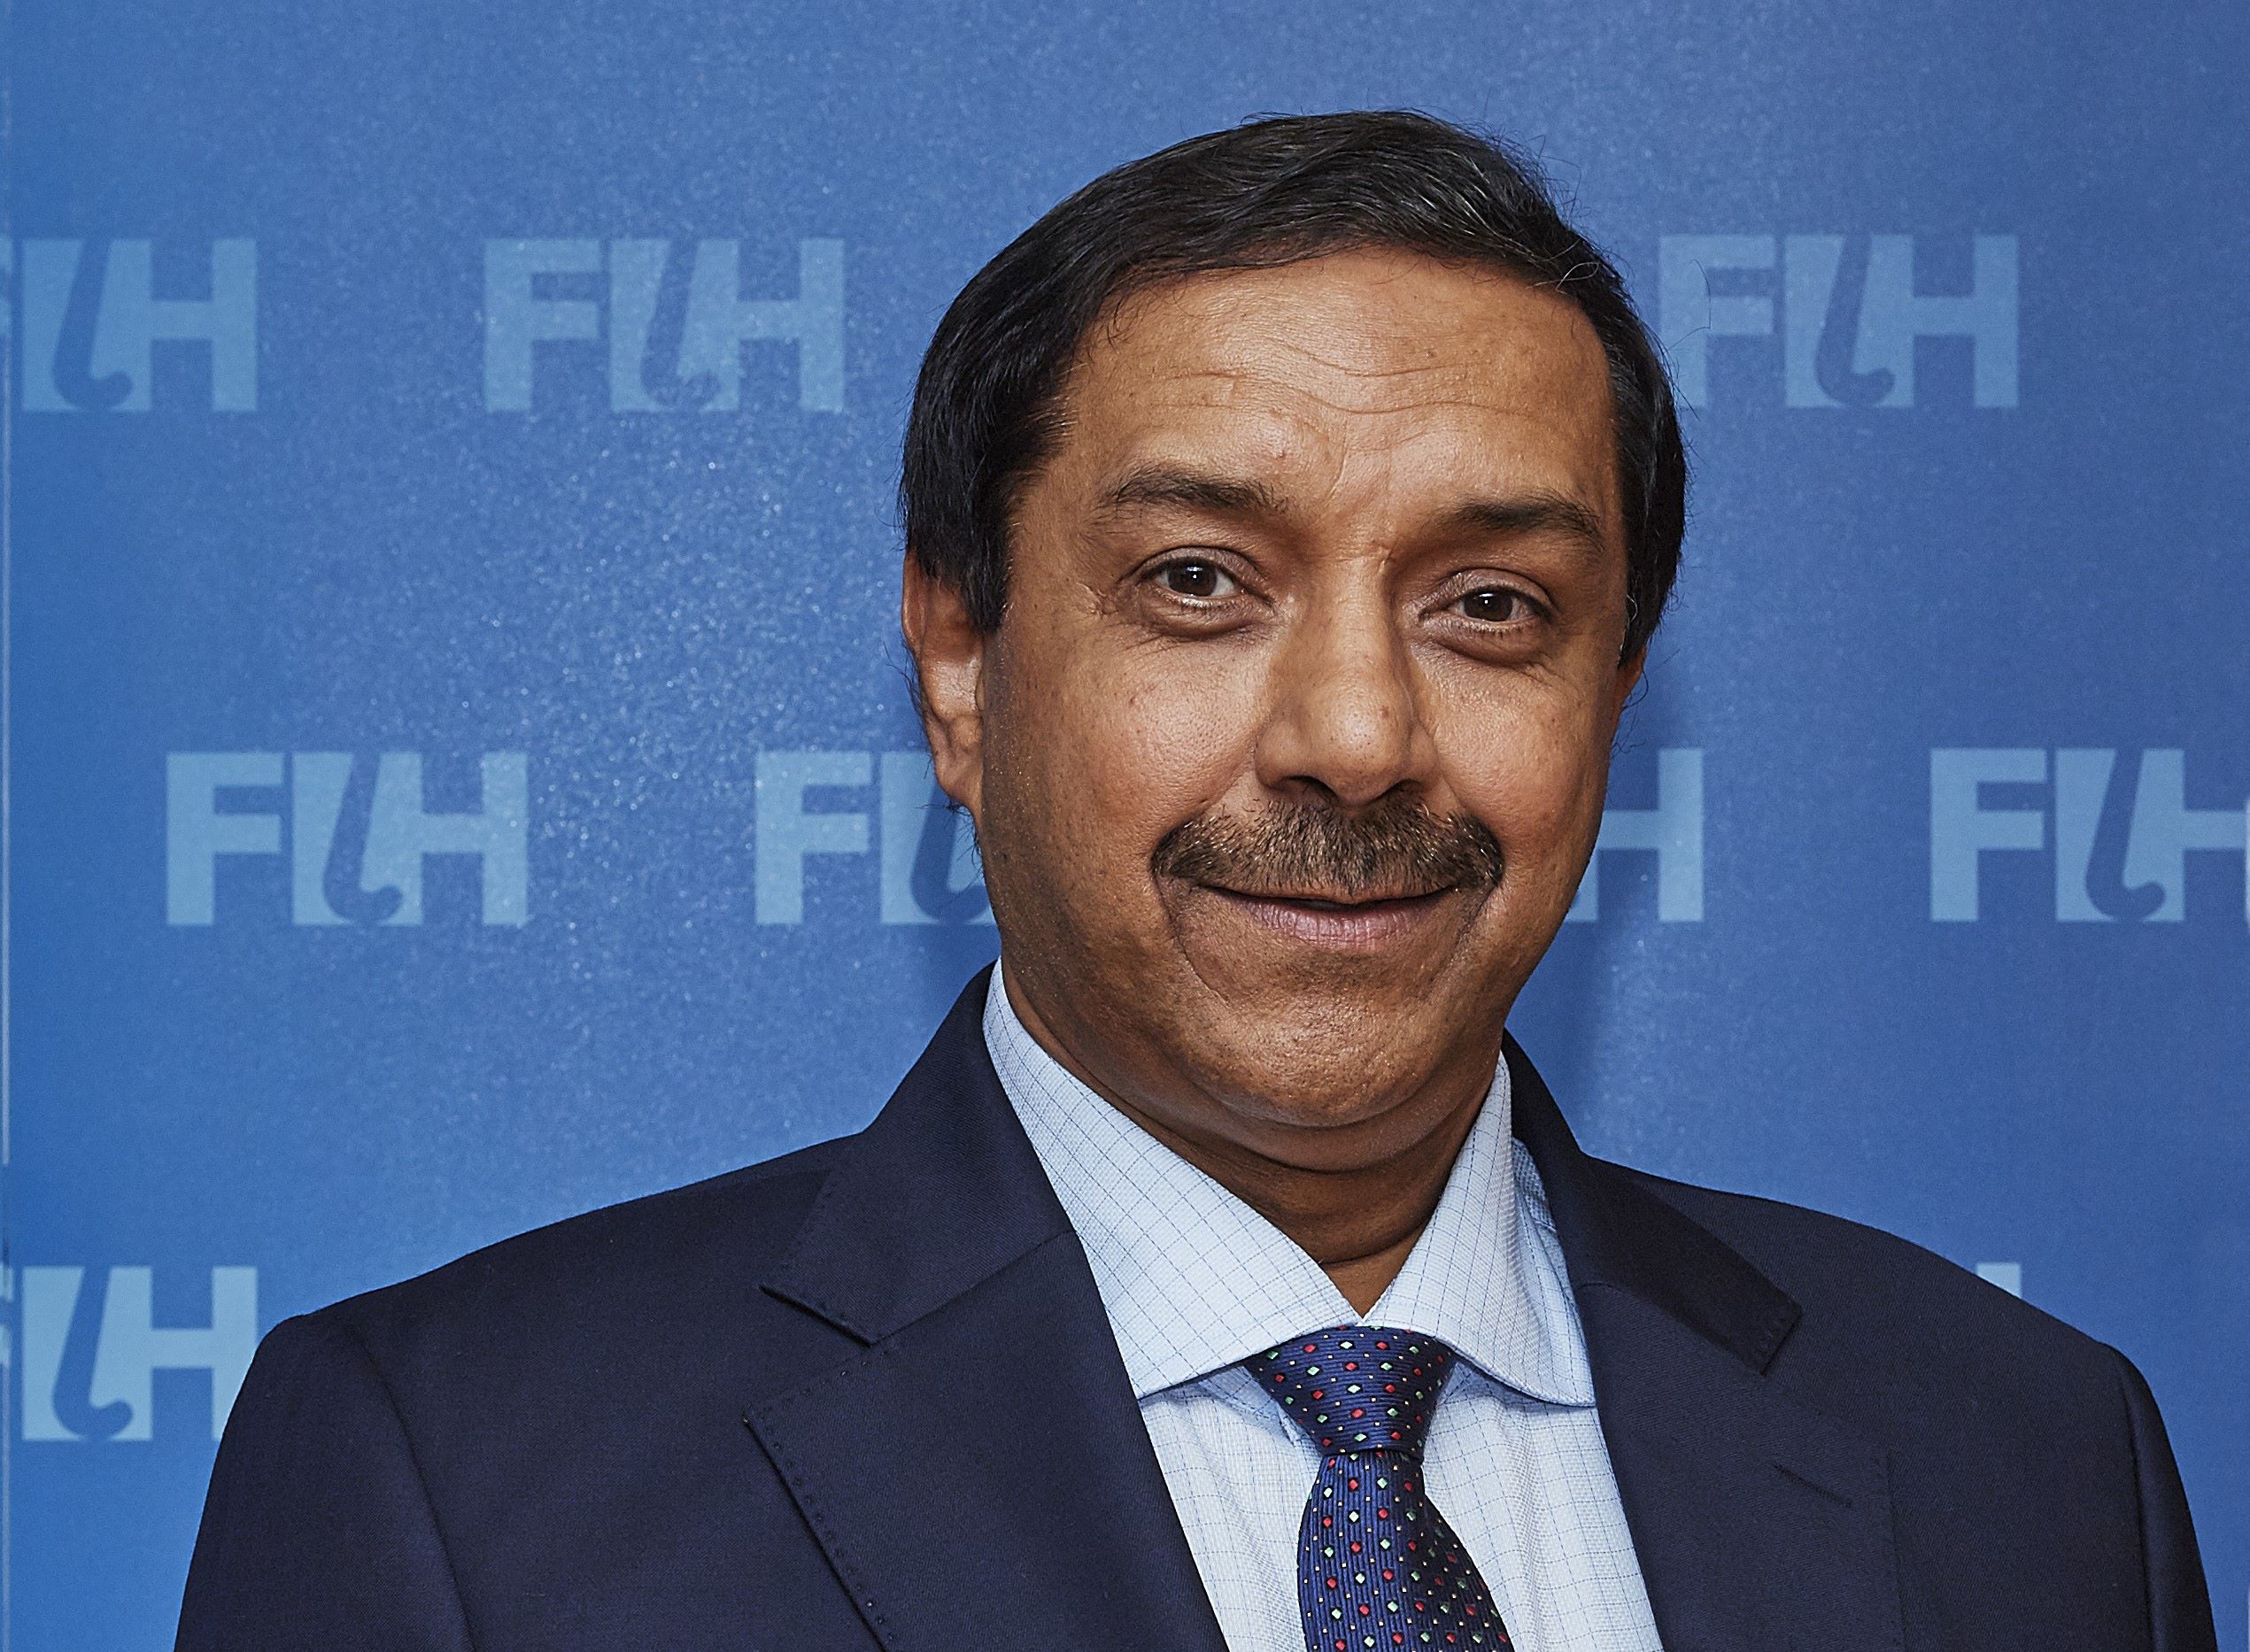 FIH President: “Everything is ready for the hockey stars to shine!”